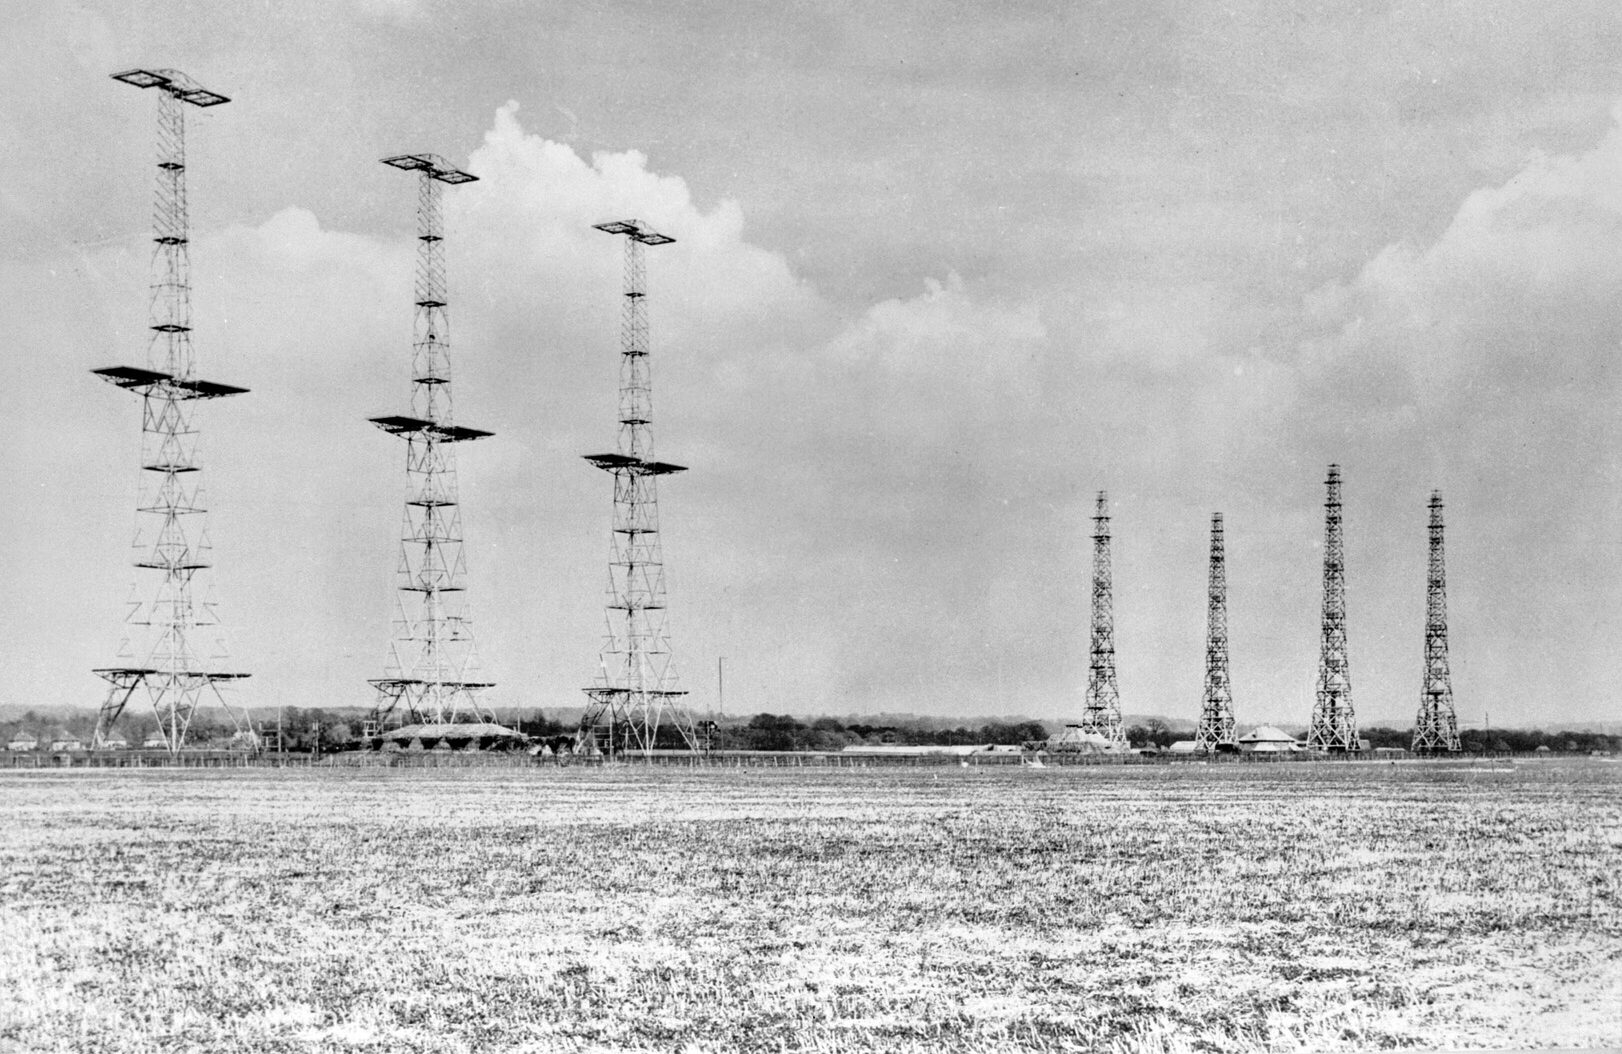 “Chain Home” radar masts, such as these on the coast at RAF Poling, Bawdsey Manor, Suffolk, could detect Luftwaffe bombers assembling 200 miles away in France and give Fighter Command warning of an attack.